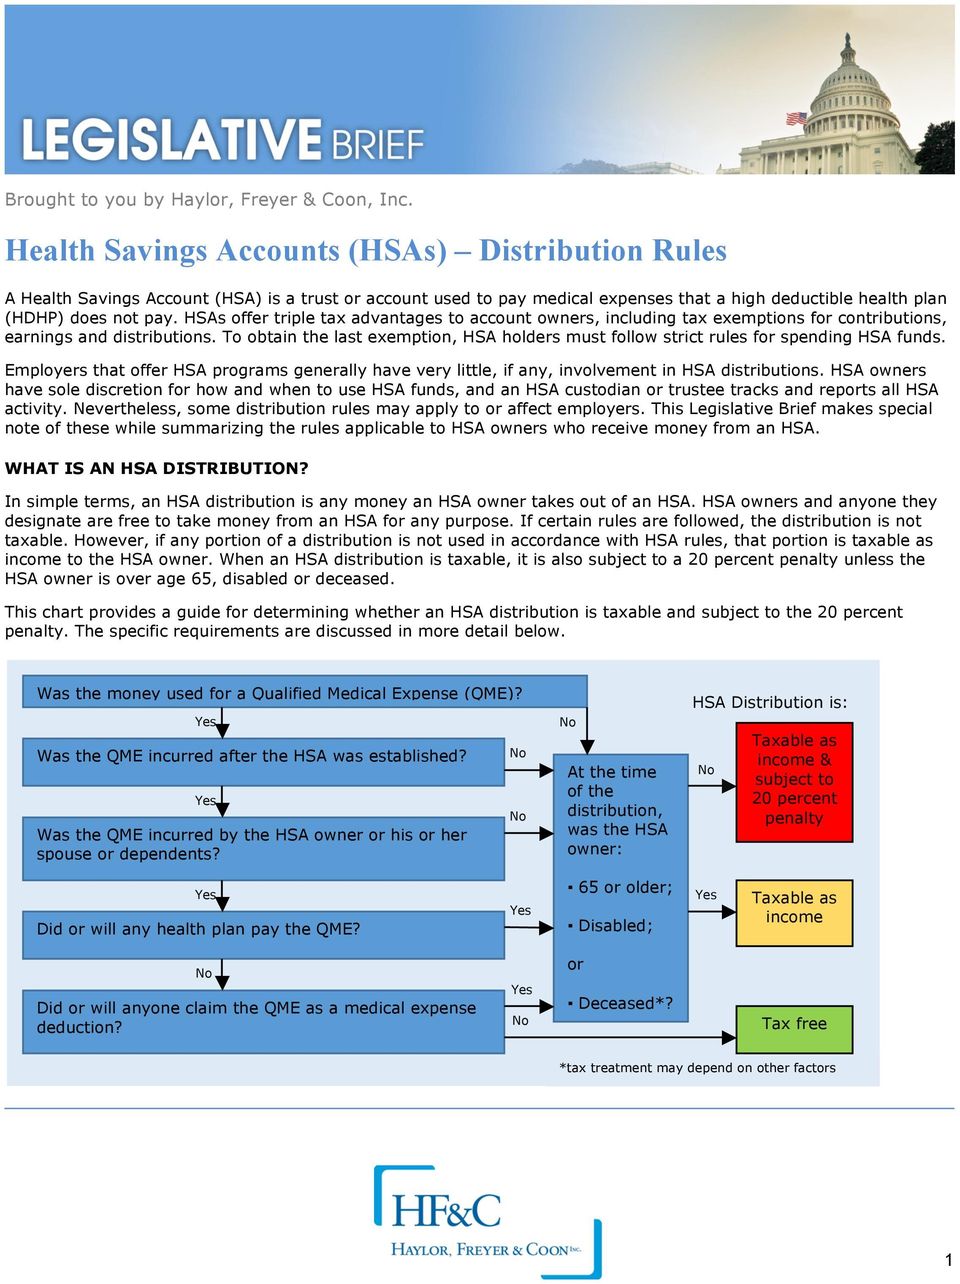 HSAs ffer triple tax advantages t accunt wners, including tax exemptins fr cntributins, earnings and distributins. T btain the last exemptin, HSA hlders must fllw strict rules fr spending HSA funds.